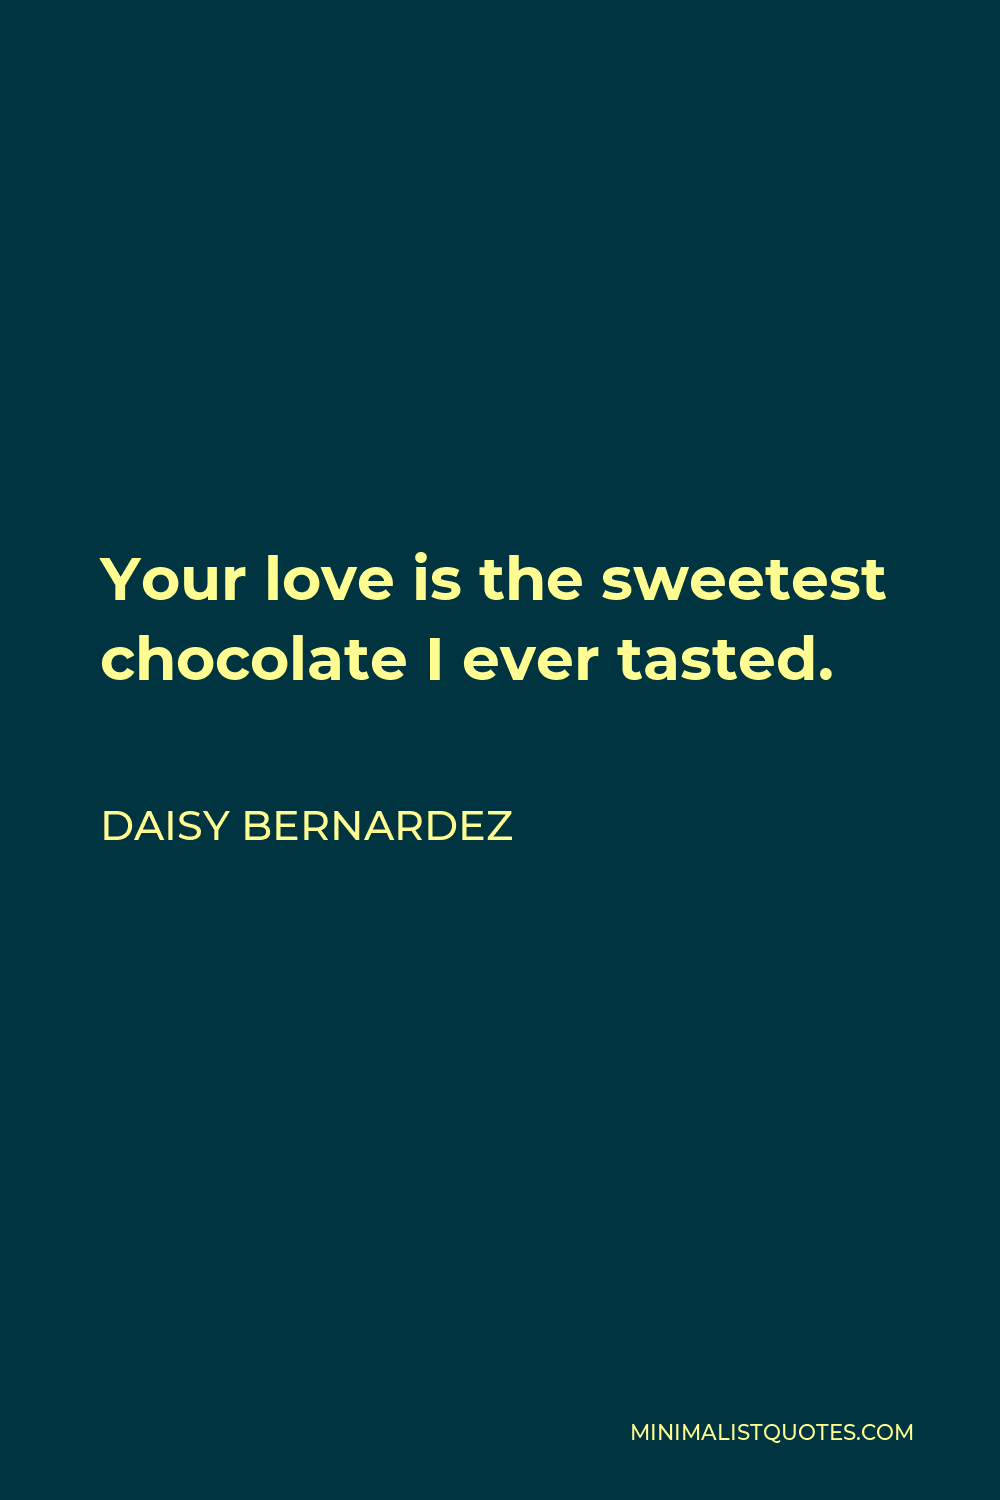 Daisy Bernardez Quote - Your love is the sweetest chocolate I ever tasted.